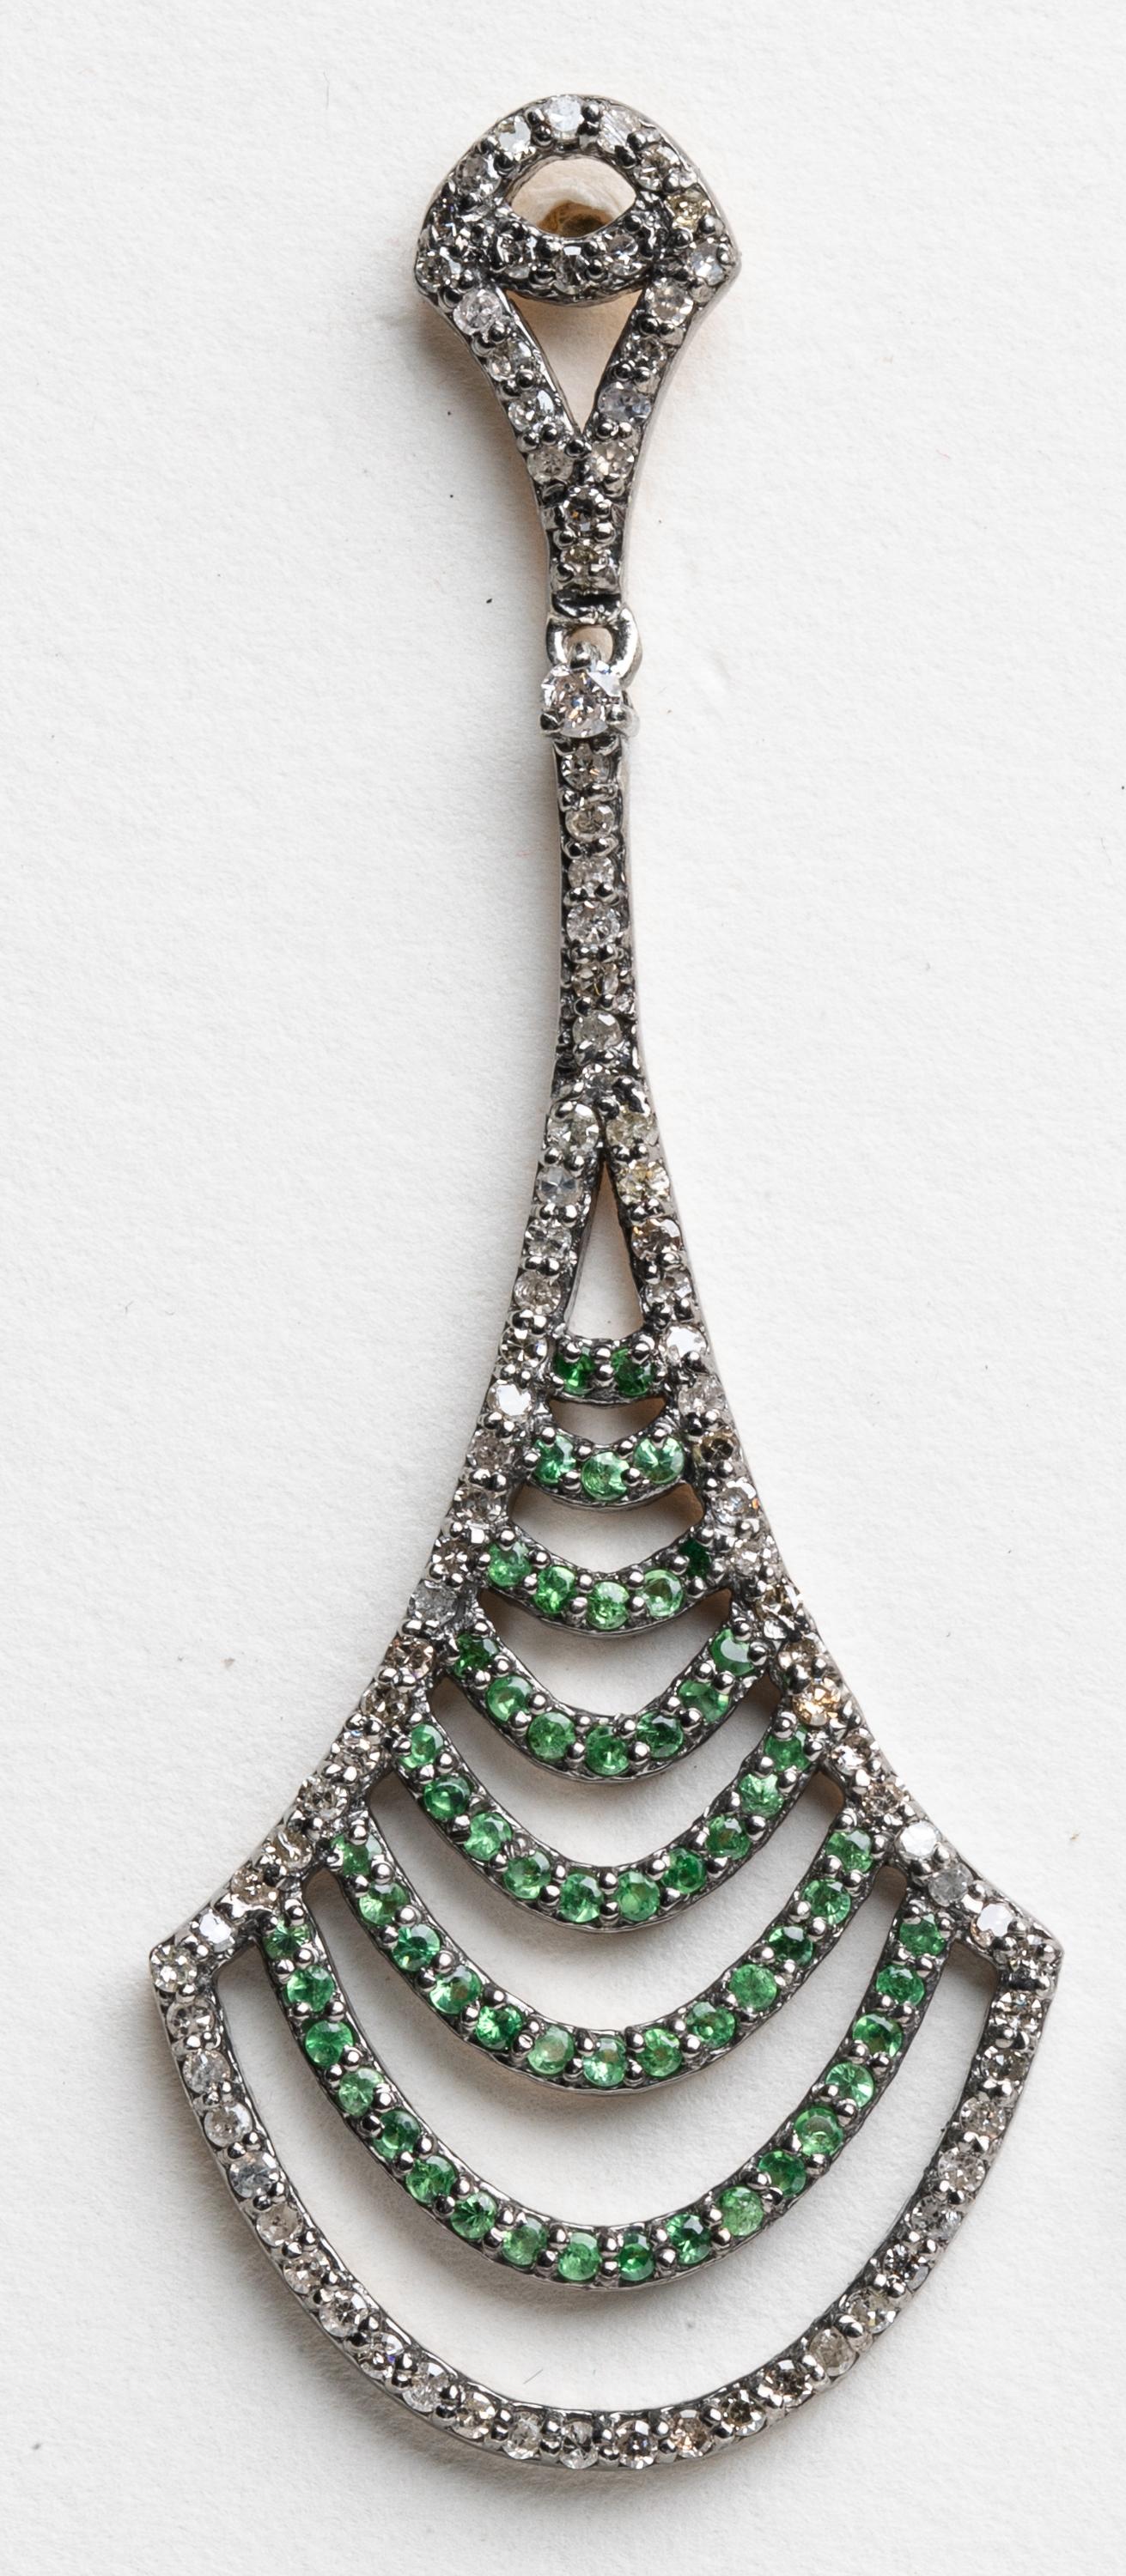 A pair of fan-shaped chandelier earrings with pave`-set tsavorite round-cut stones bordered by brilliant round diamonds also in a pave` setting.  Set in sterling silver with 18K gold posts for pierced ears.  Stones total 2.35 carats.